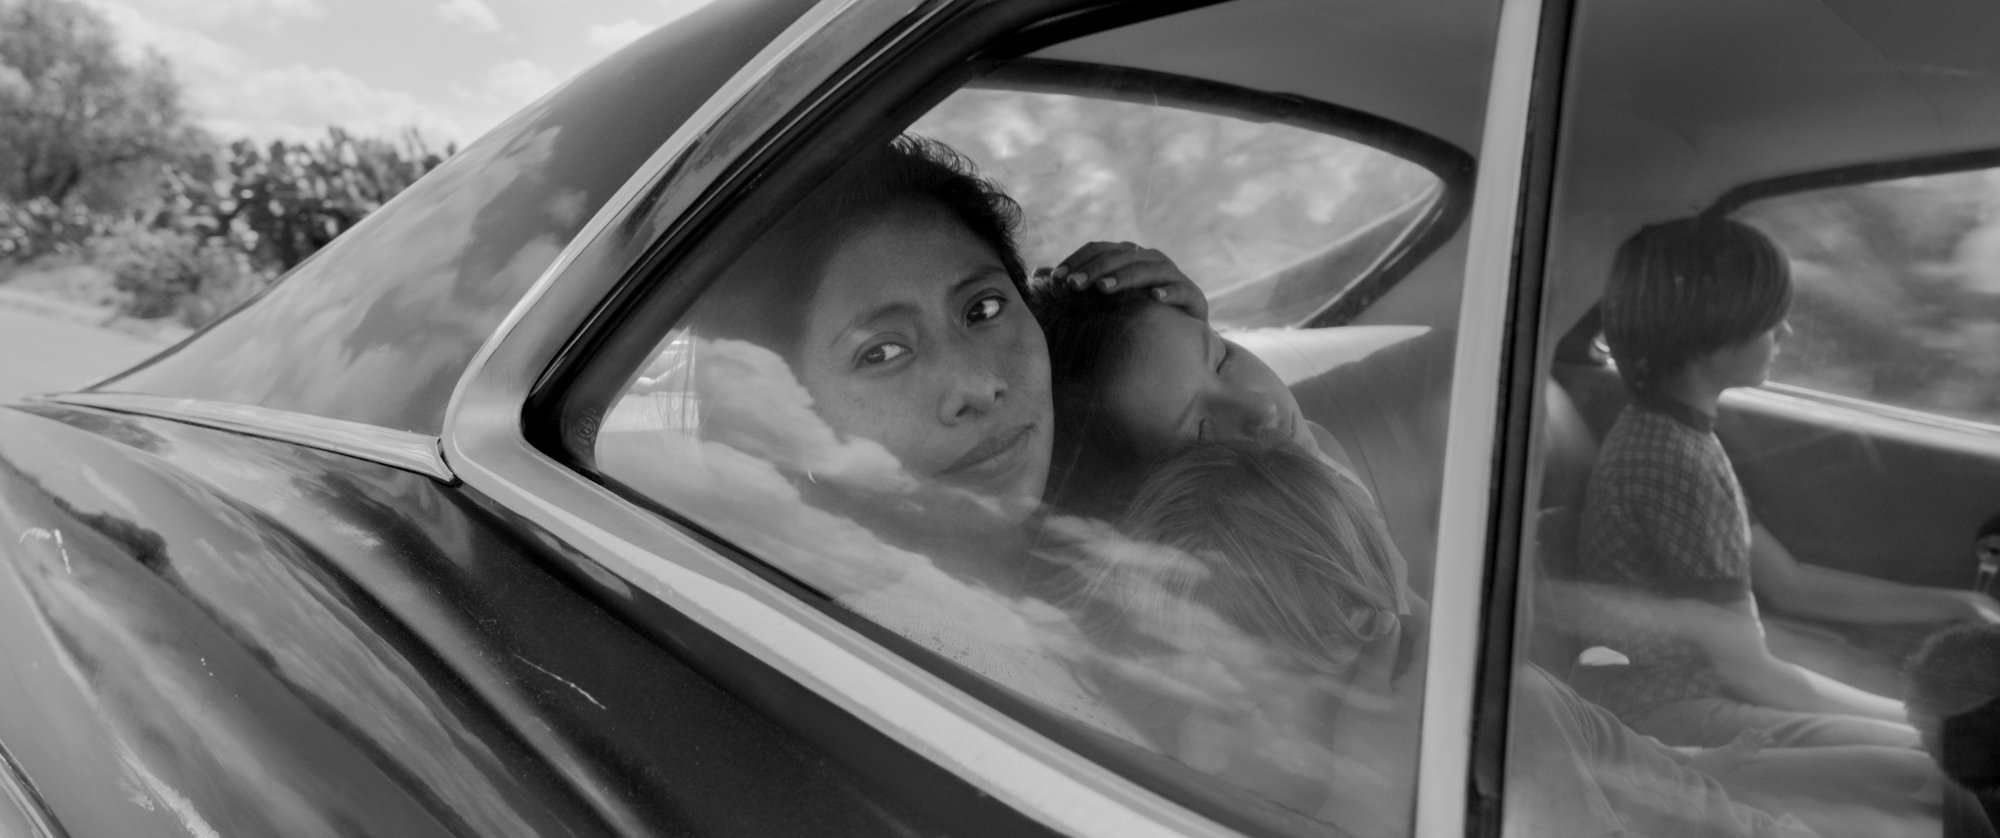 A woman and two children in the backseat of her car.